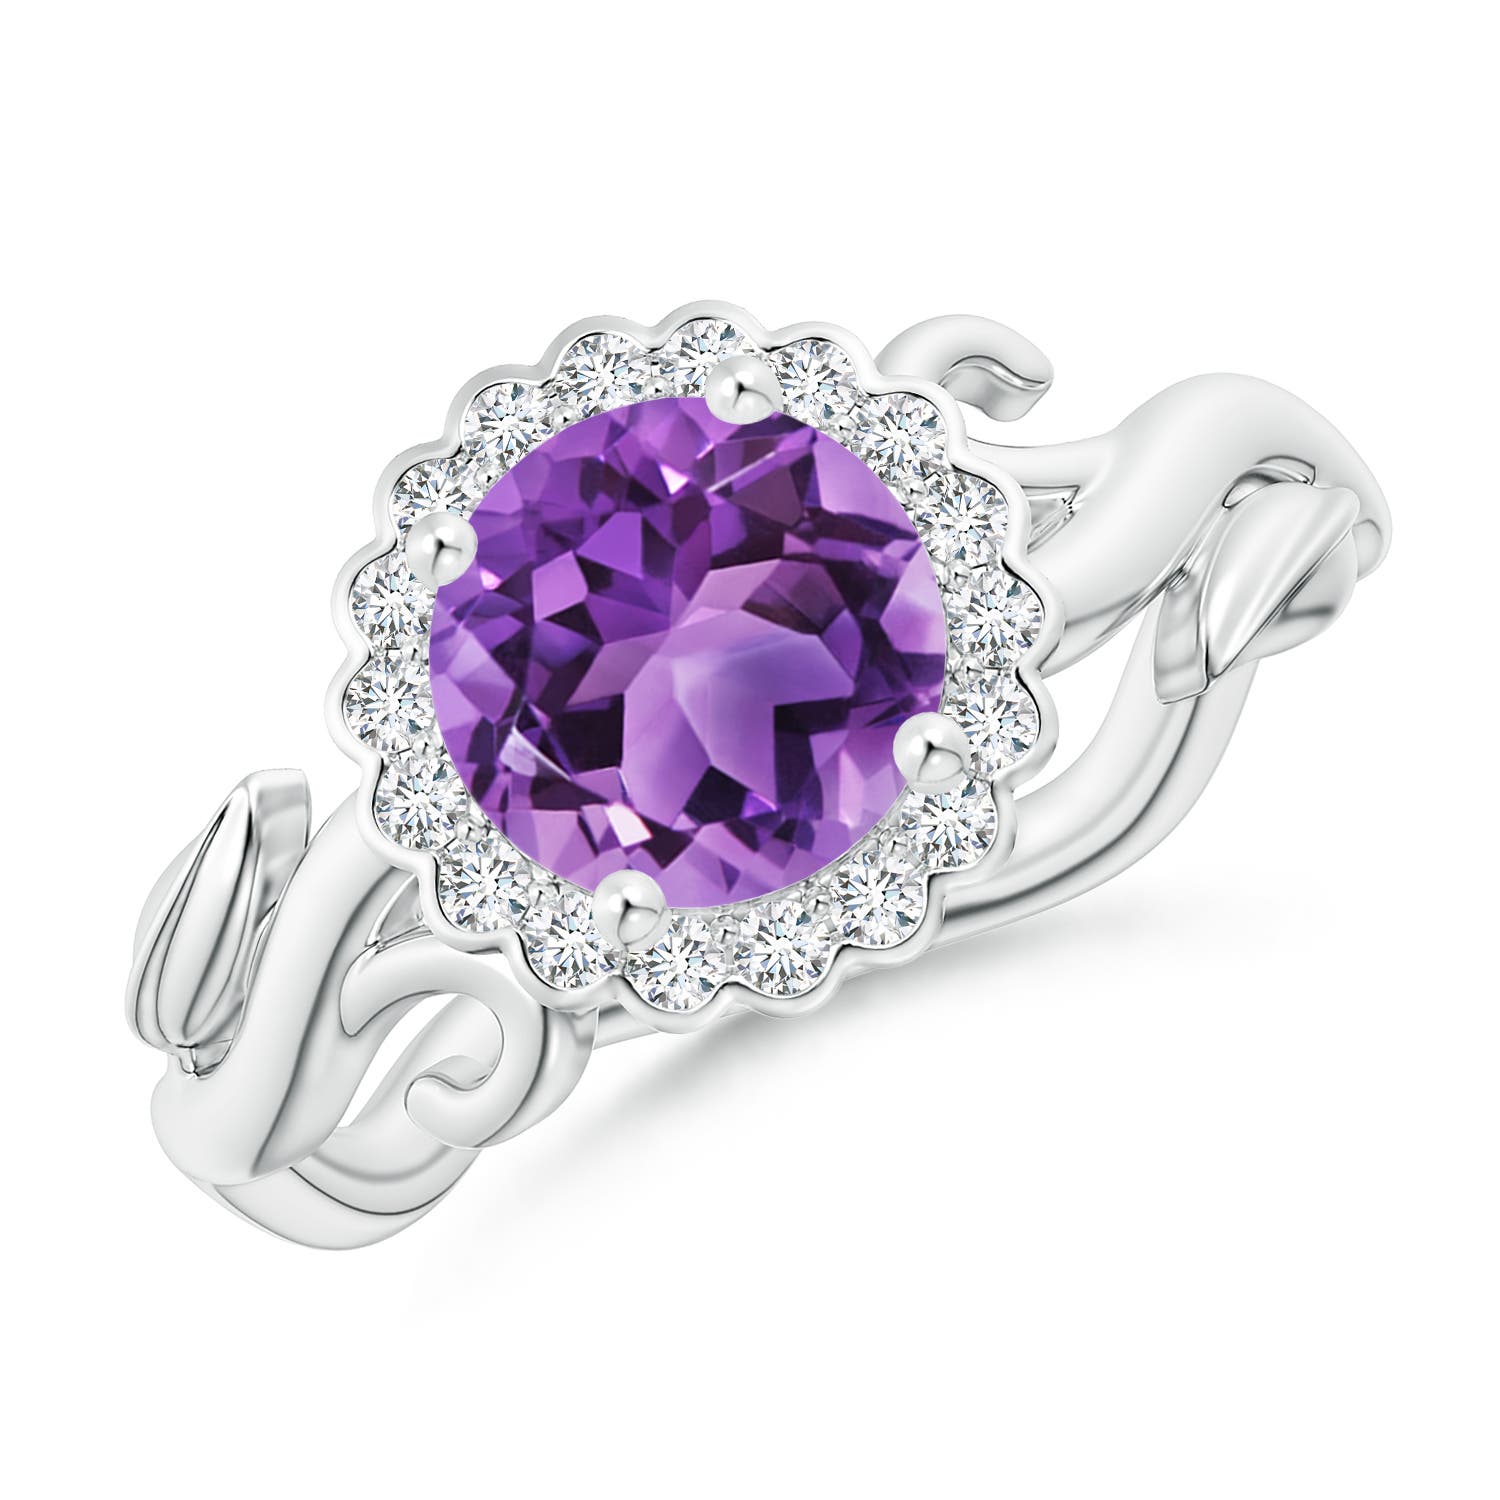 AA - Amethyst / 1.33 CT / 14 KT White Gold